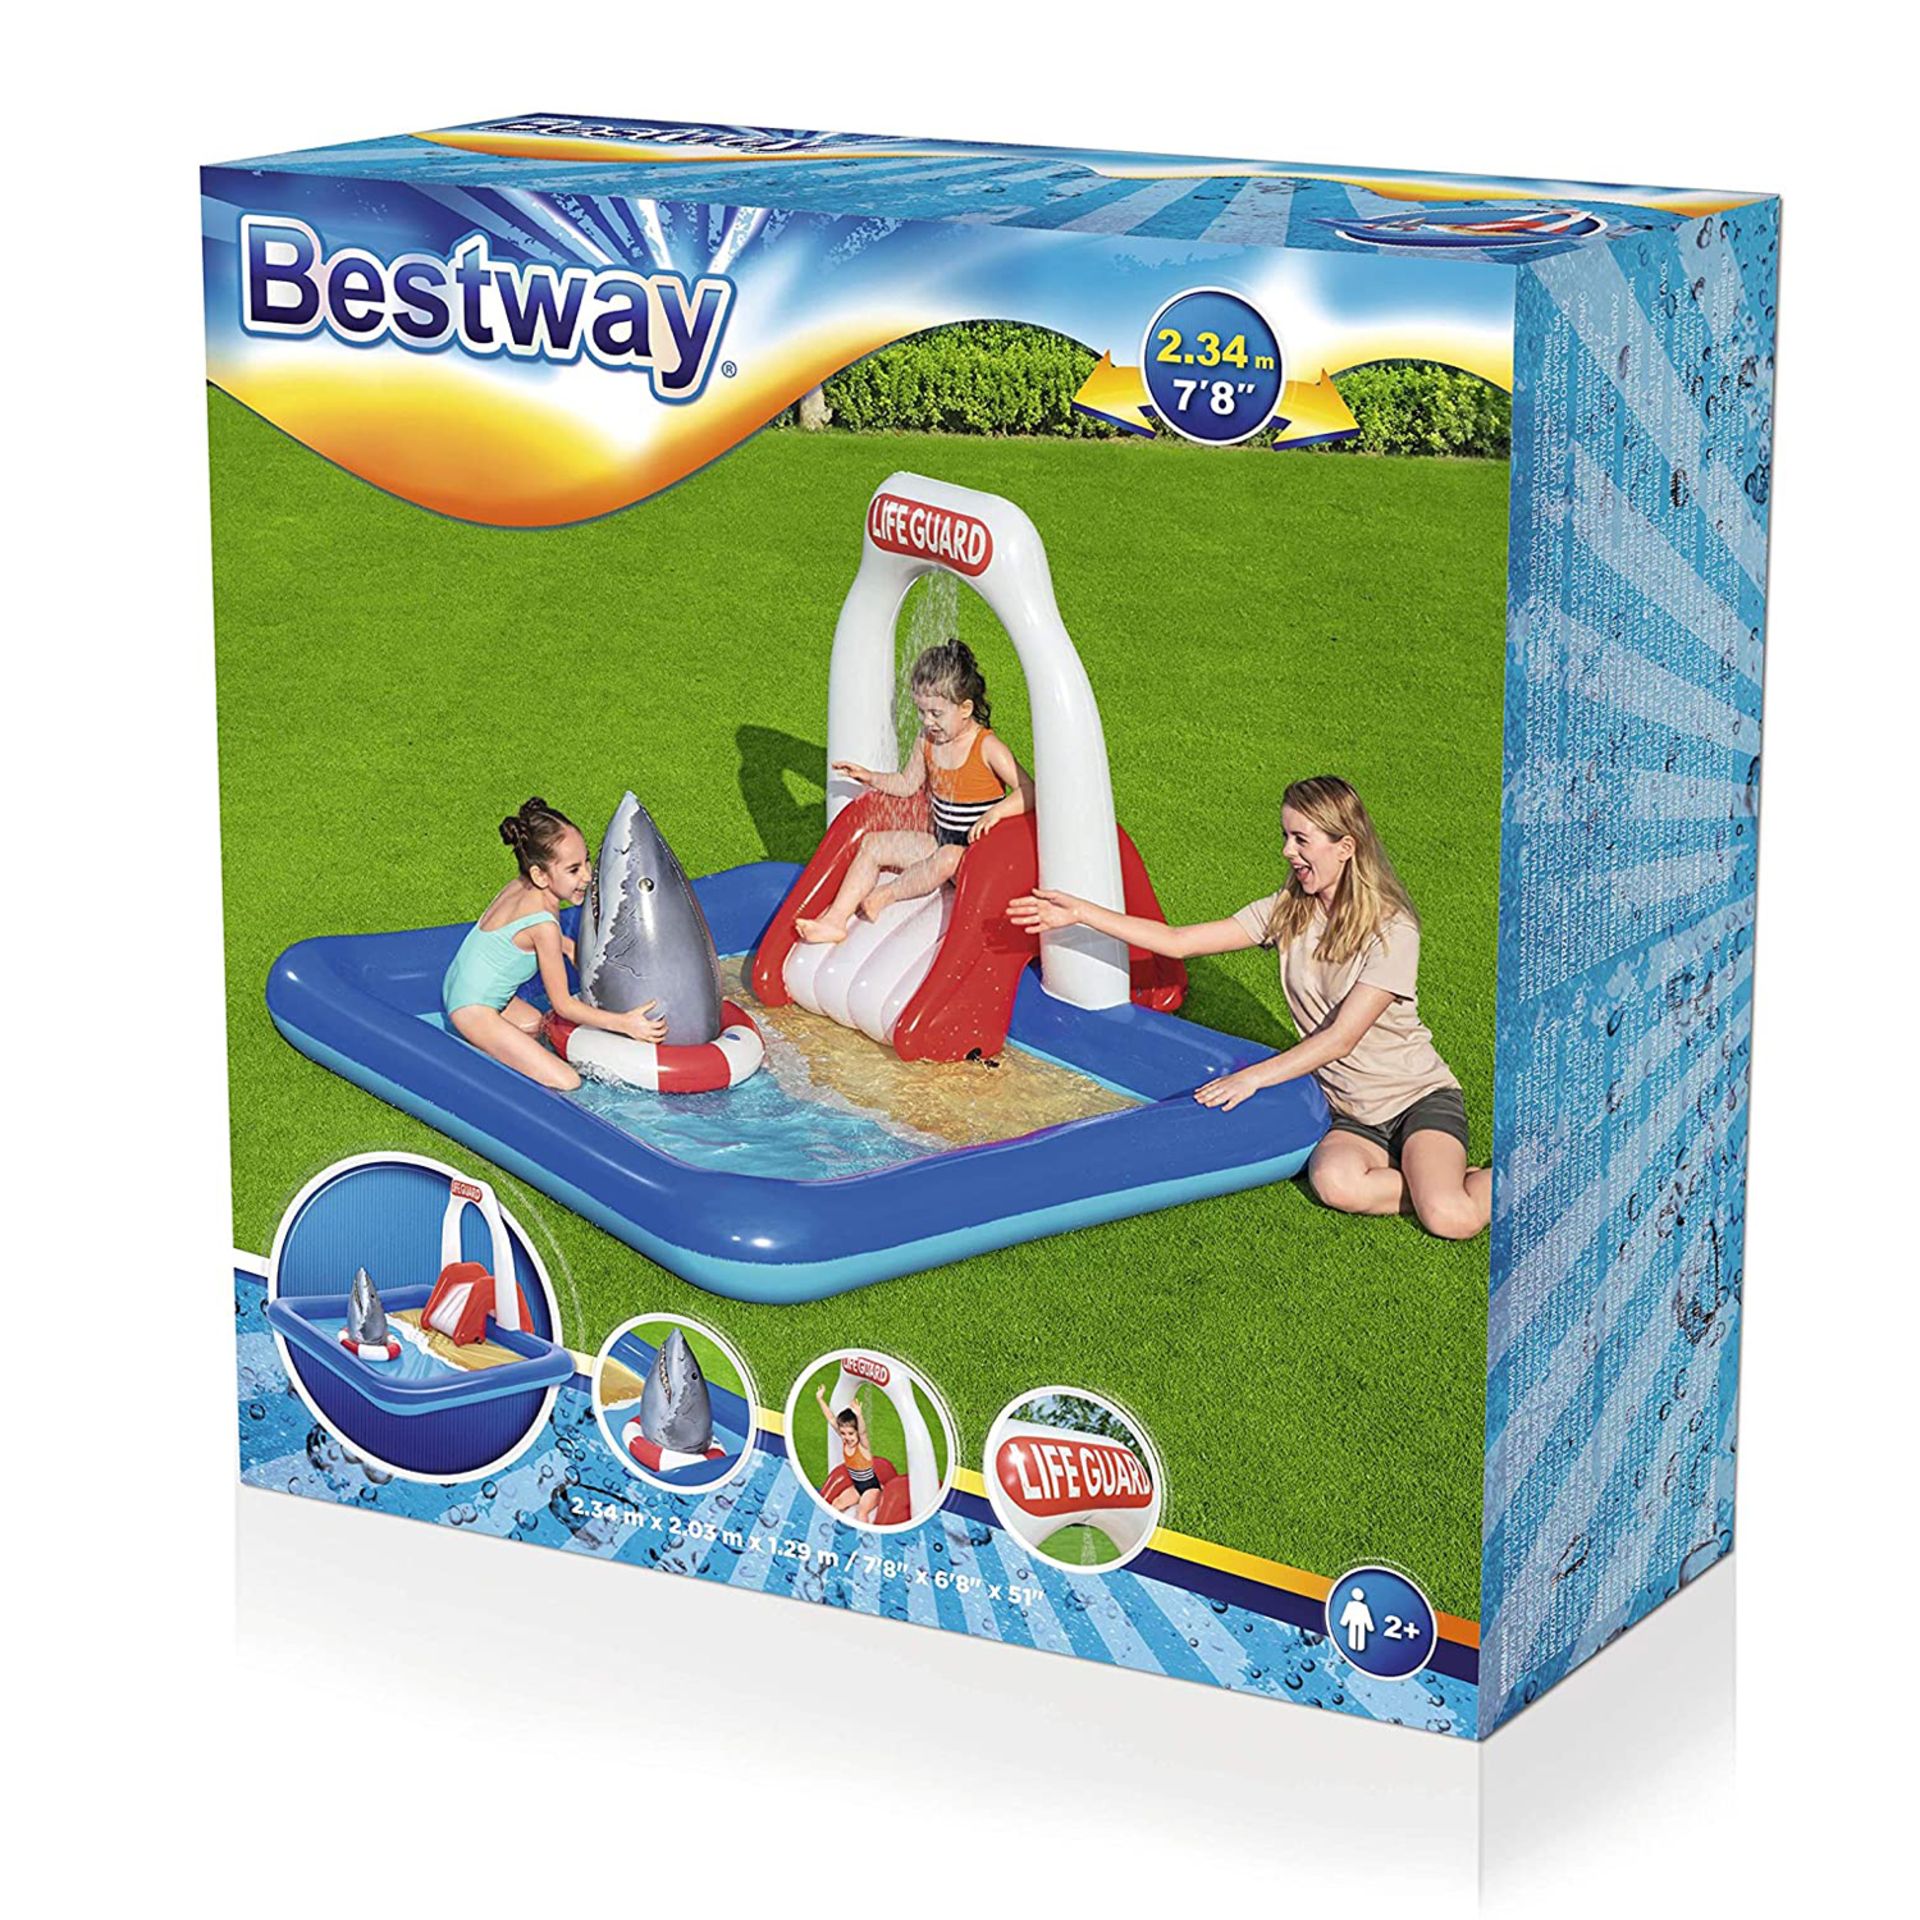 6 X BRAND NEW BESTWAY LIFEGUARD TOWER PLAY CENTRE POOL - WATER TOWER SPAYER - REMOVABE SLIDE WITH